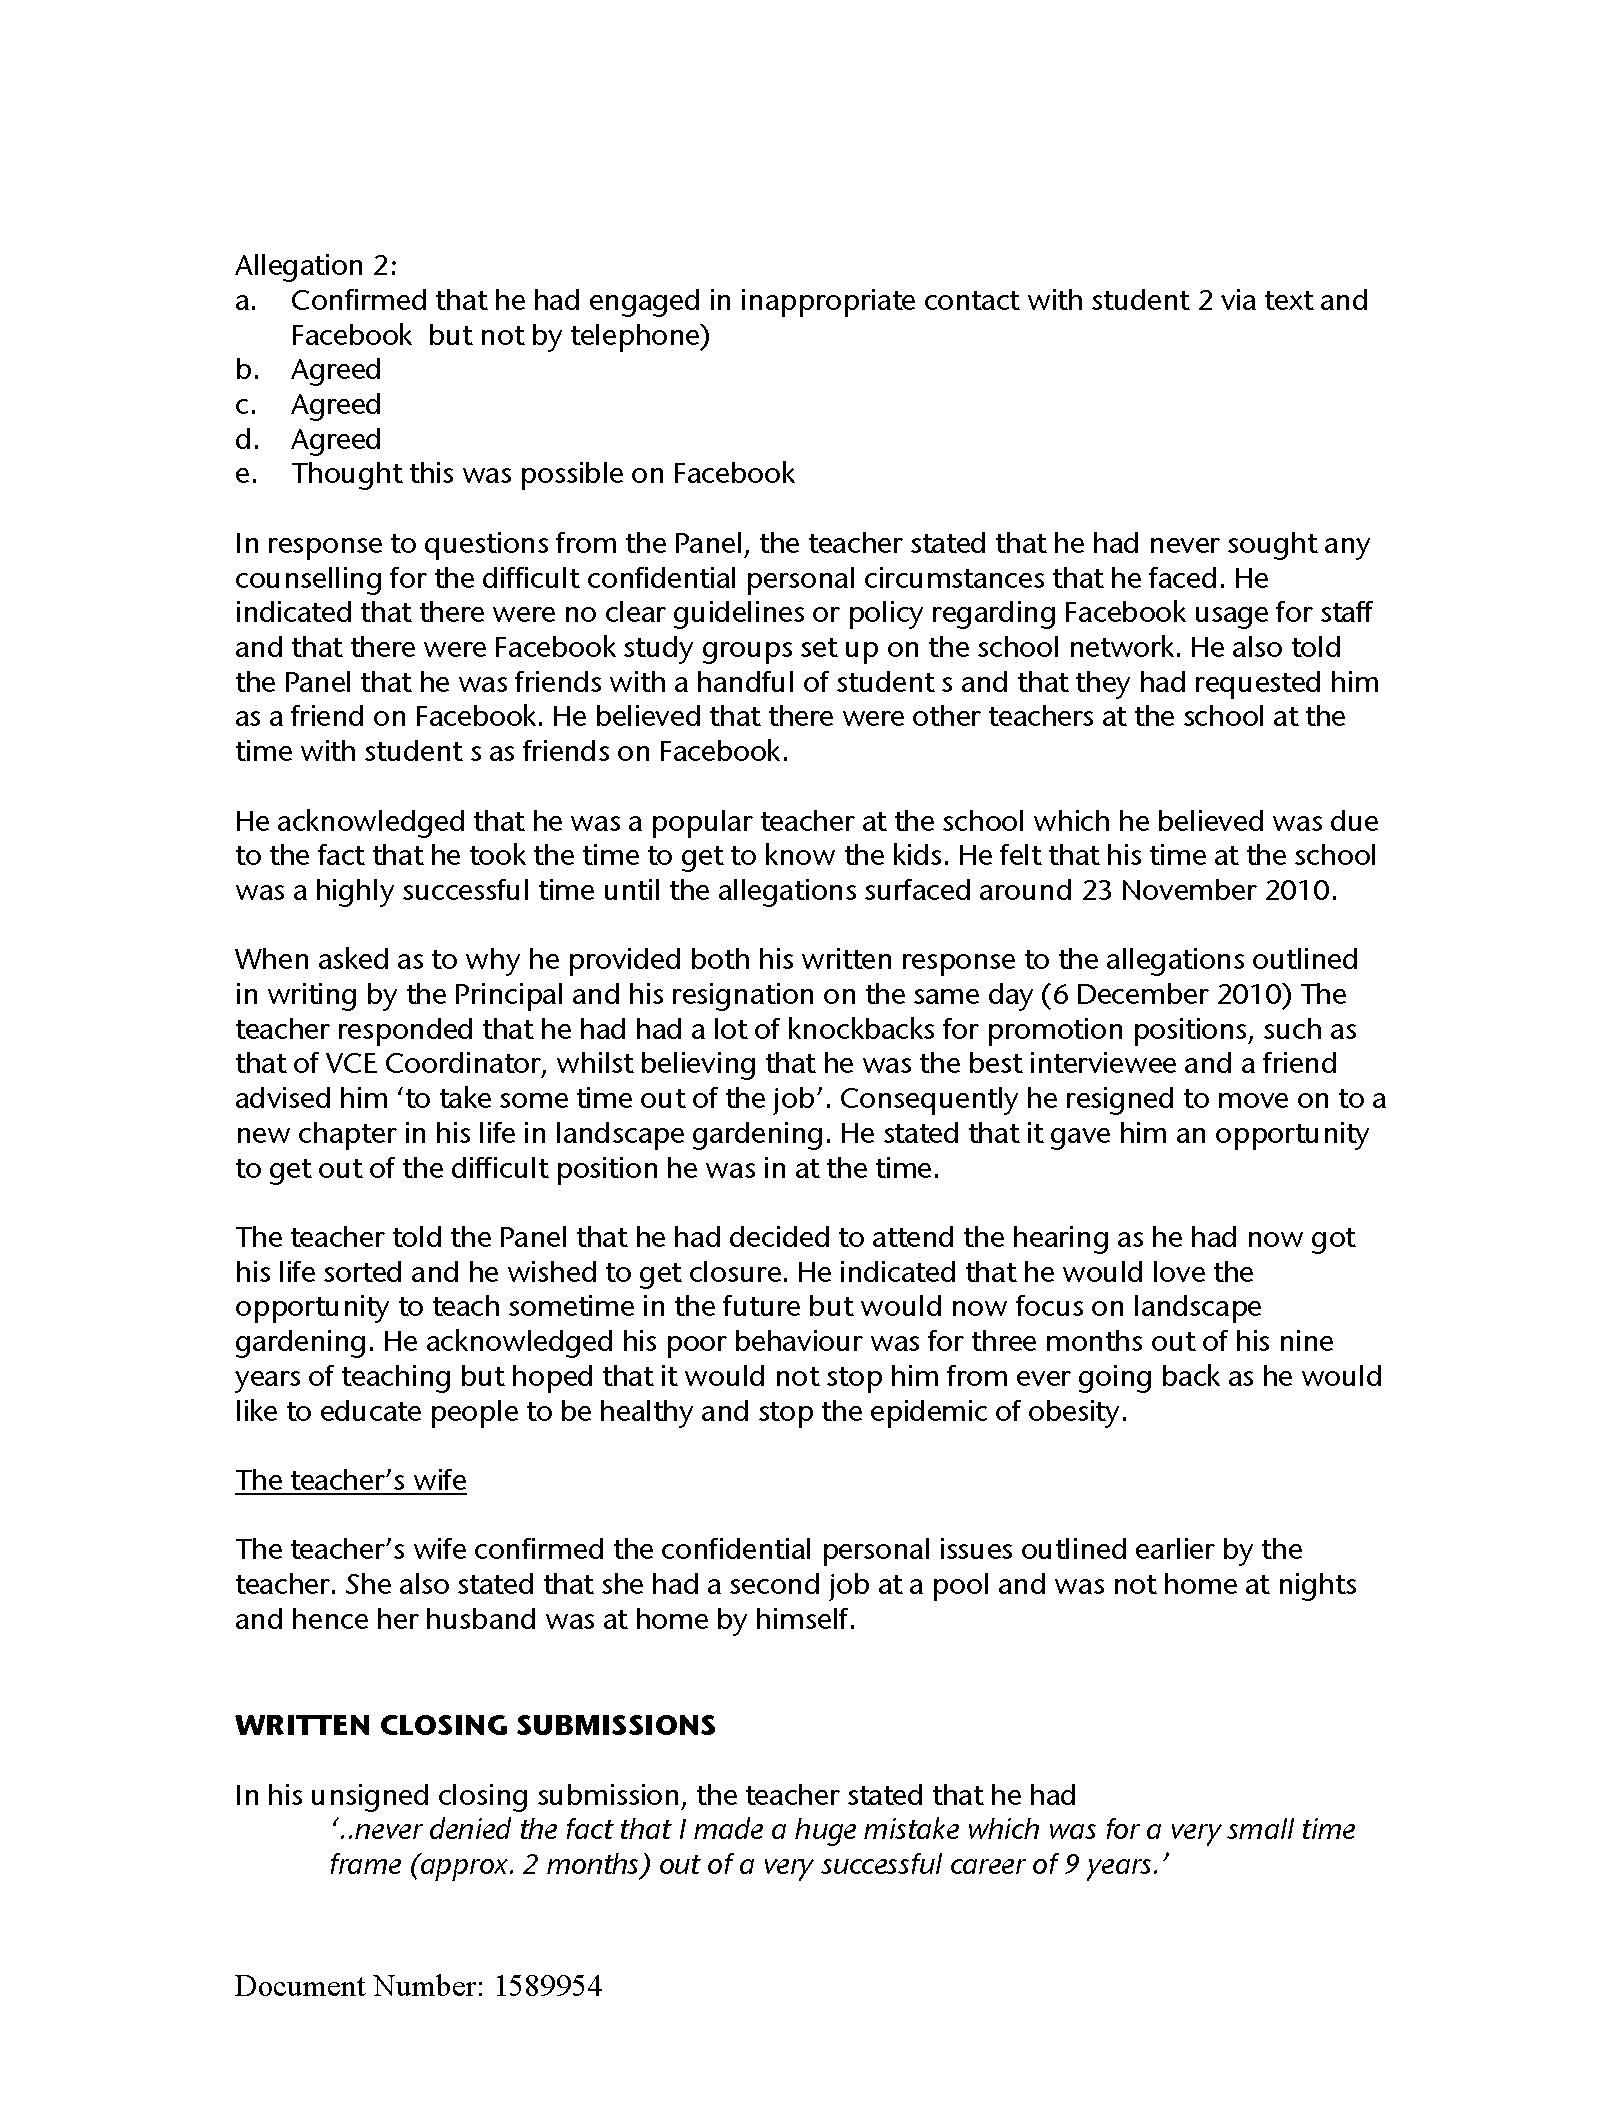 Copy of SanitisedPleydellDecision09.png